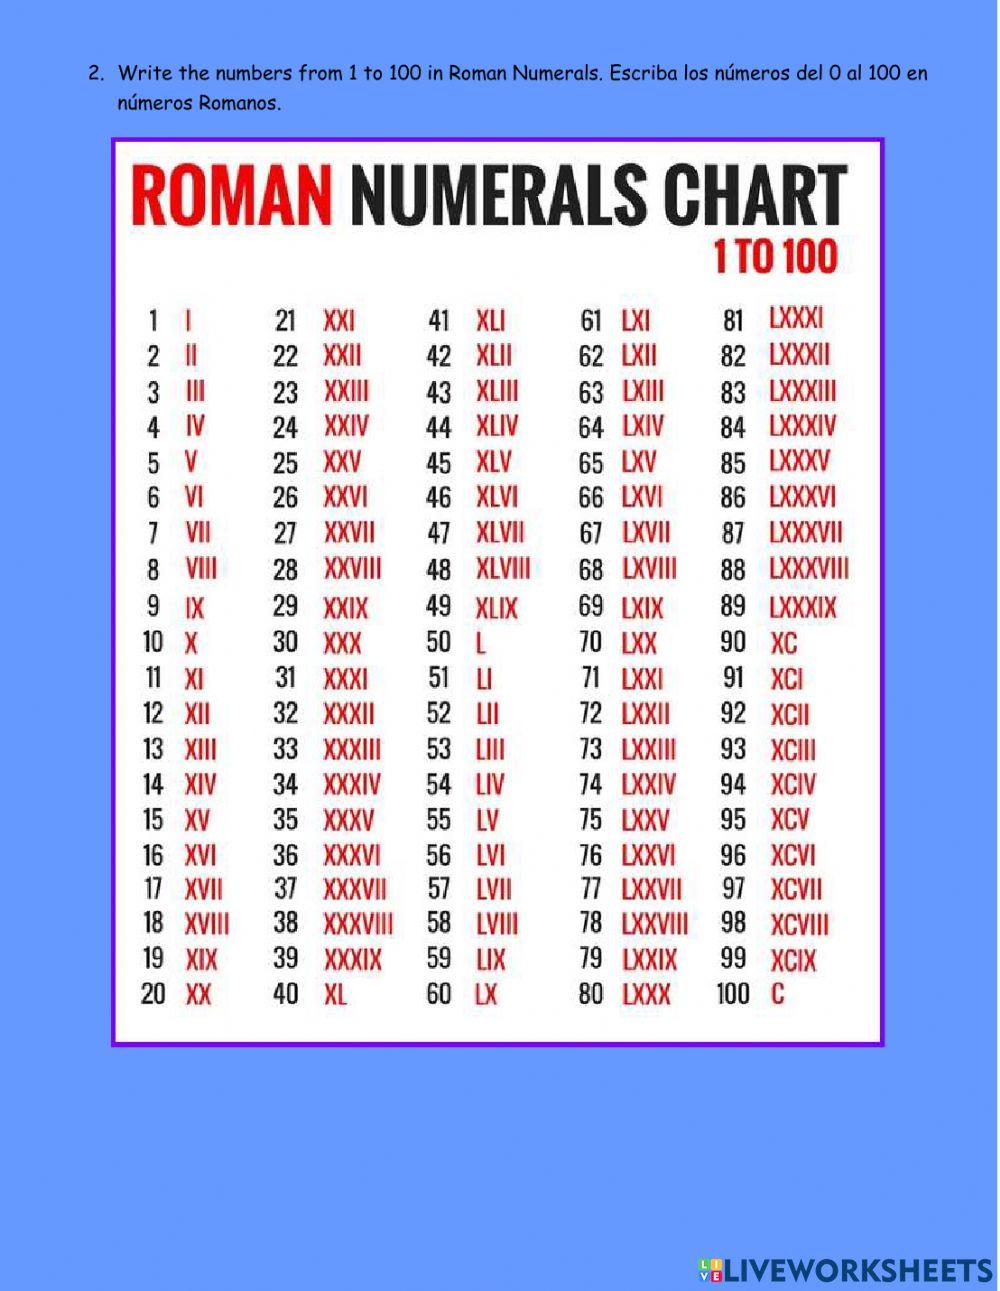 Roman numerals interactive activity for 2 | Live Worksheets